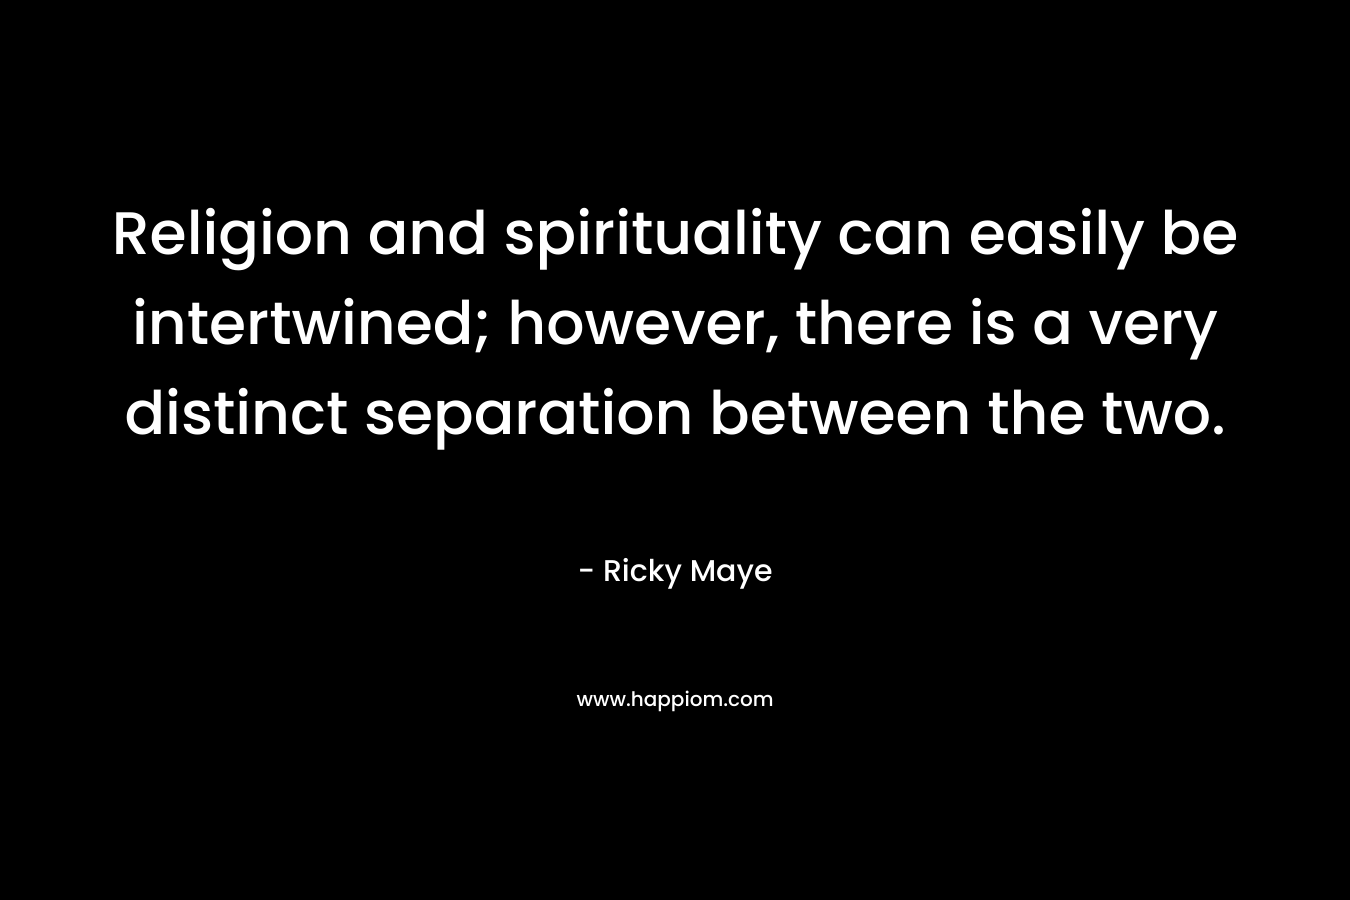 Religion and spirituality can easily be intertwined; however, there is a very distinct separation between the two. – Ricky Maye